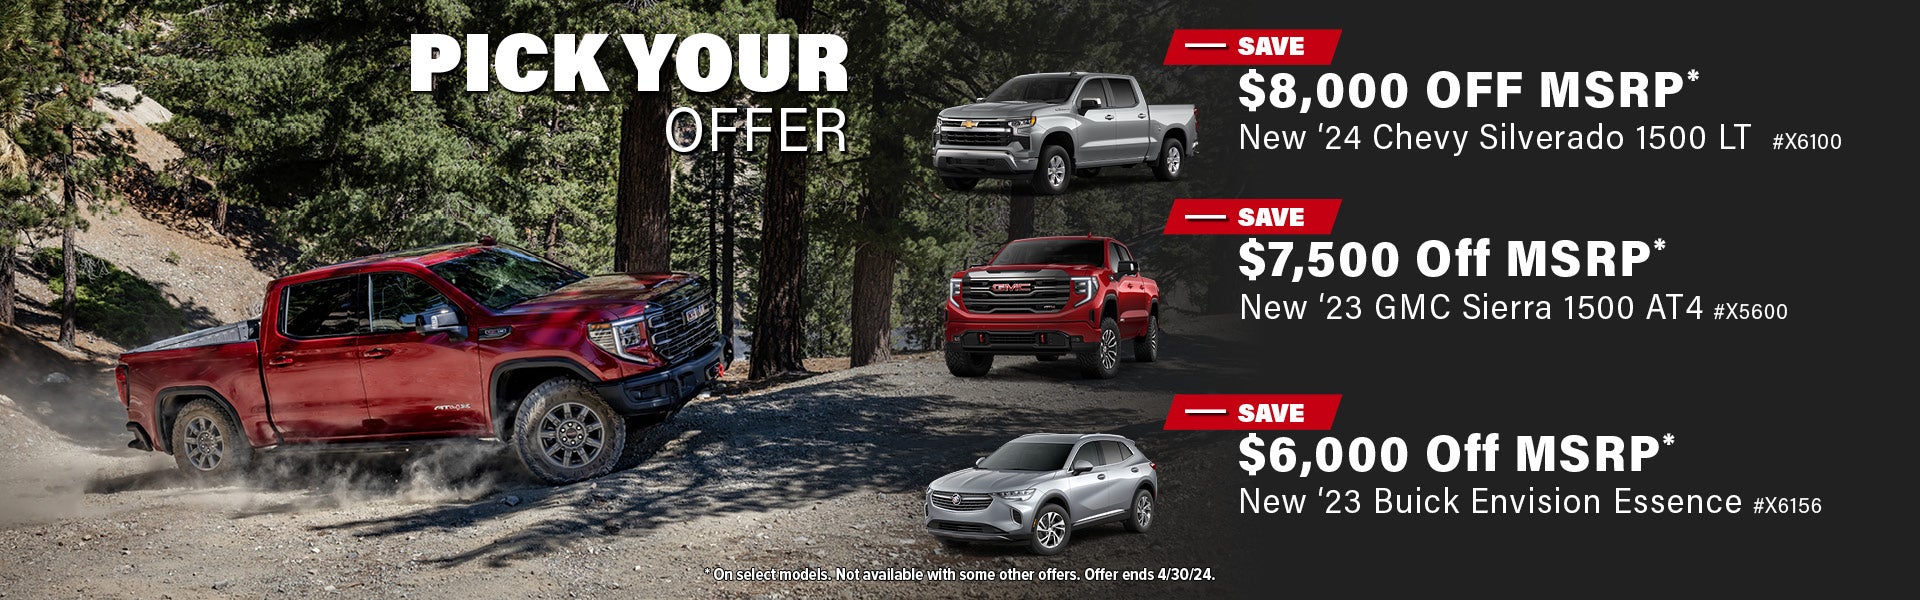 Pick Your Offer GM Homepage Banner